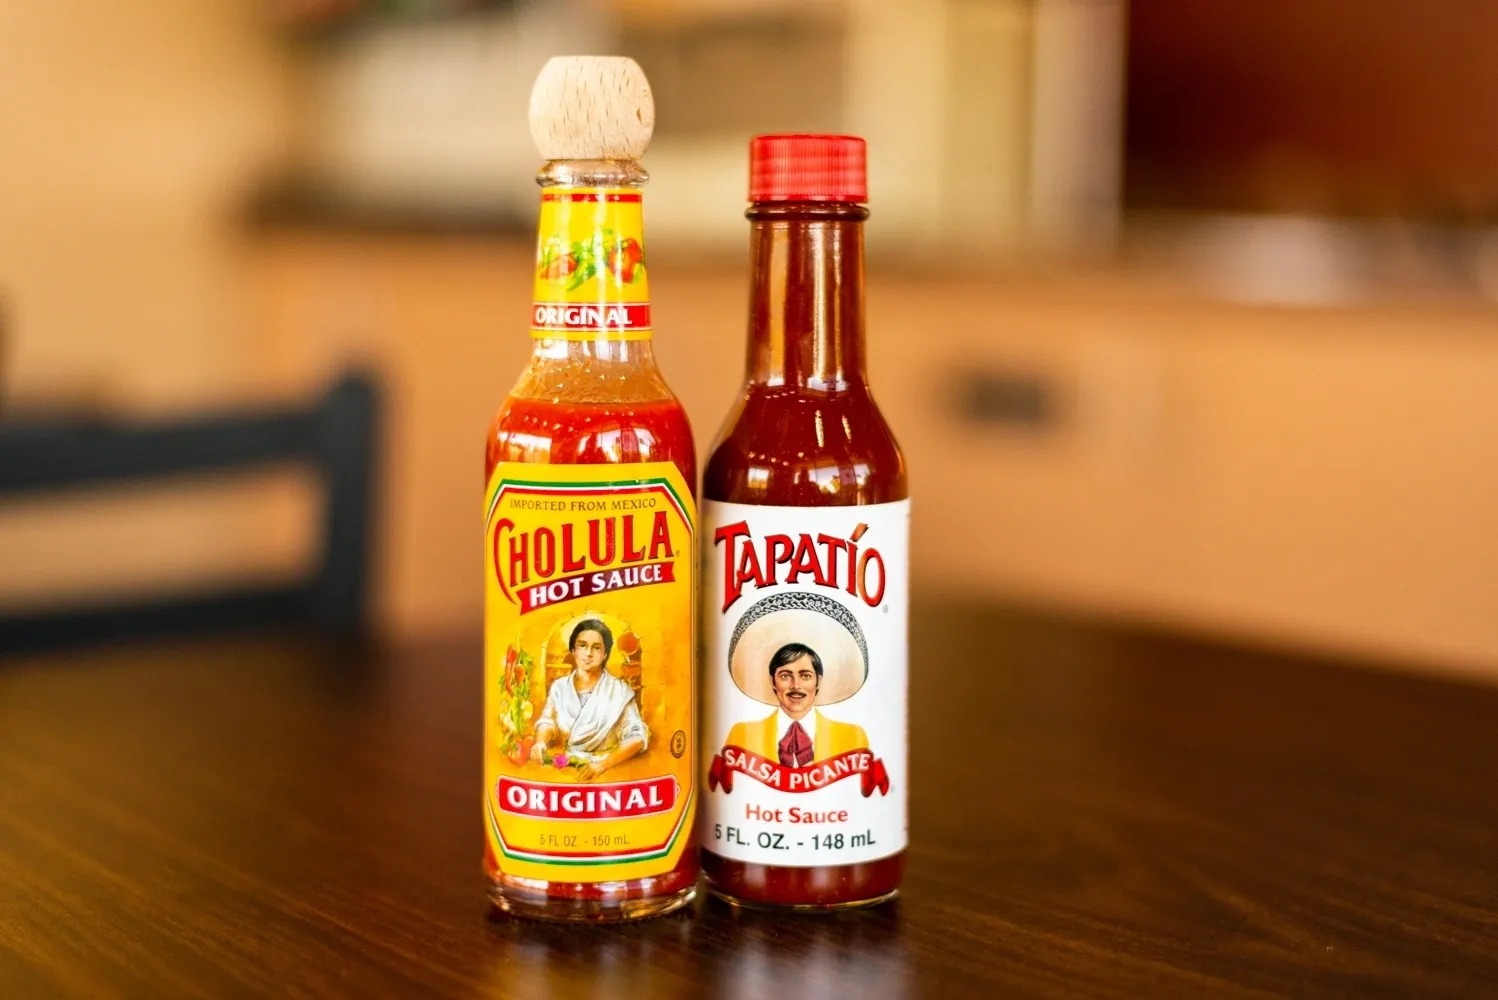 The Ultimate Showdown: Tapatio Vs Cholula – Which Mexican Hot Sauce Reigns Supreme?